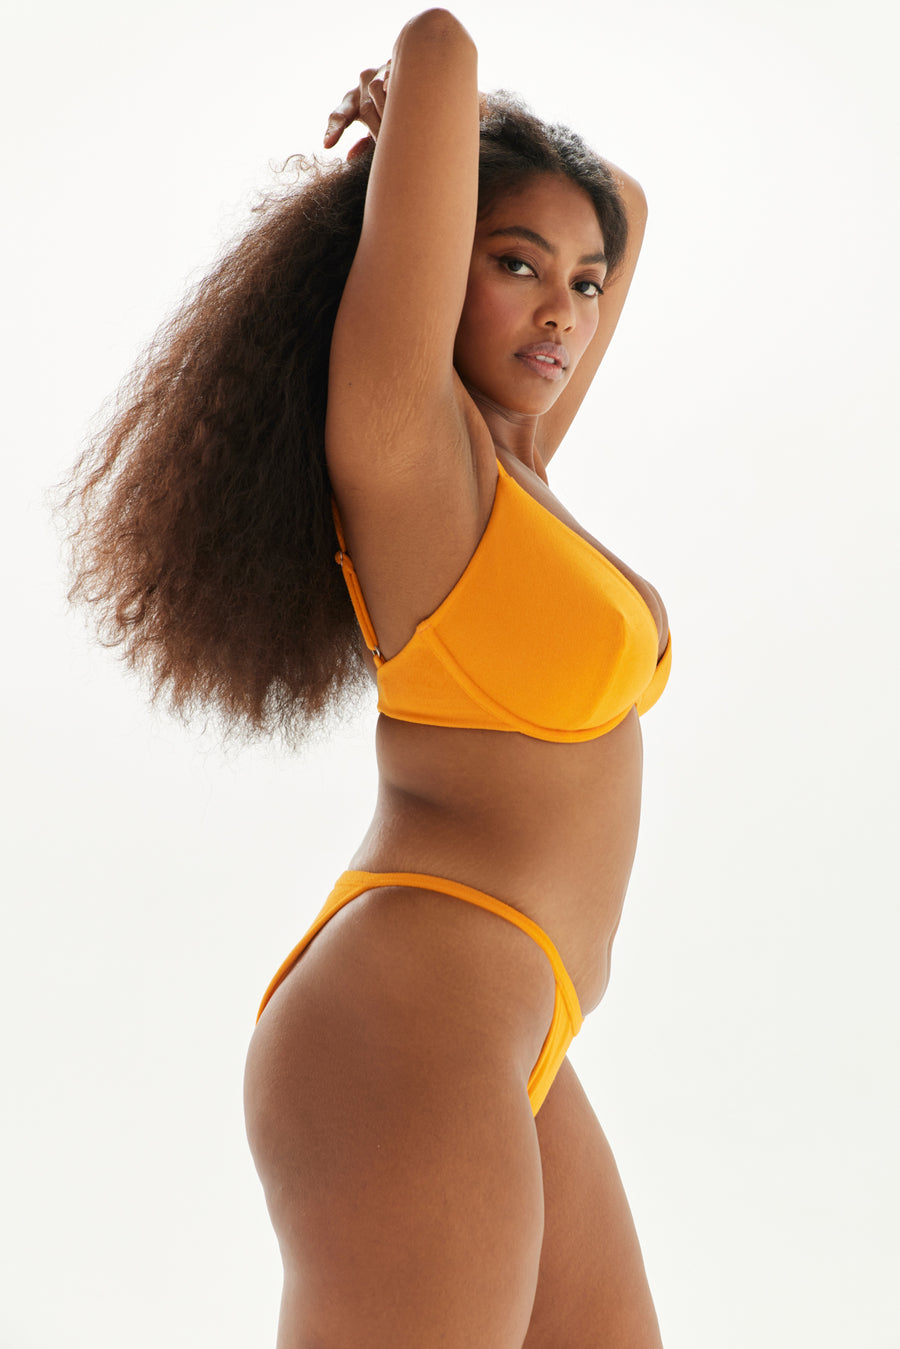 25 Hot Plus-Size Swimsuits That Are WAY Sexier Than A Damn Tankini